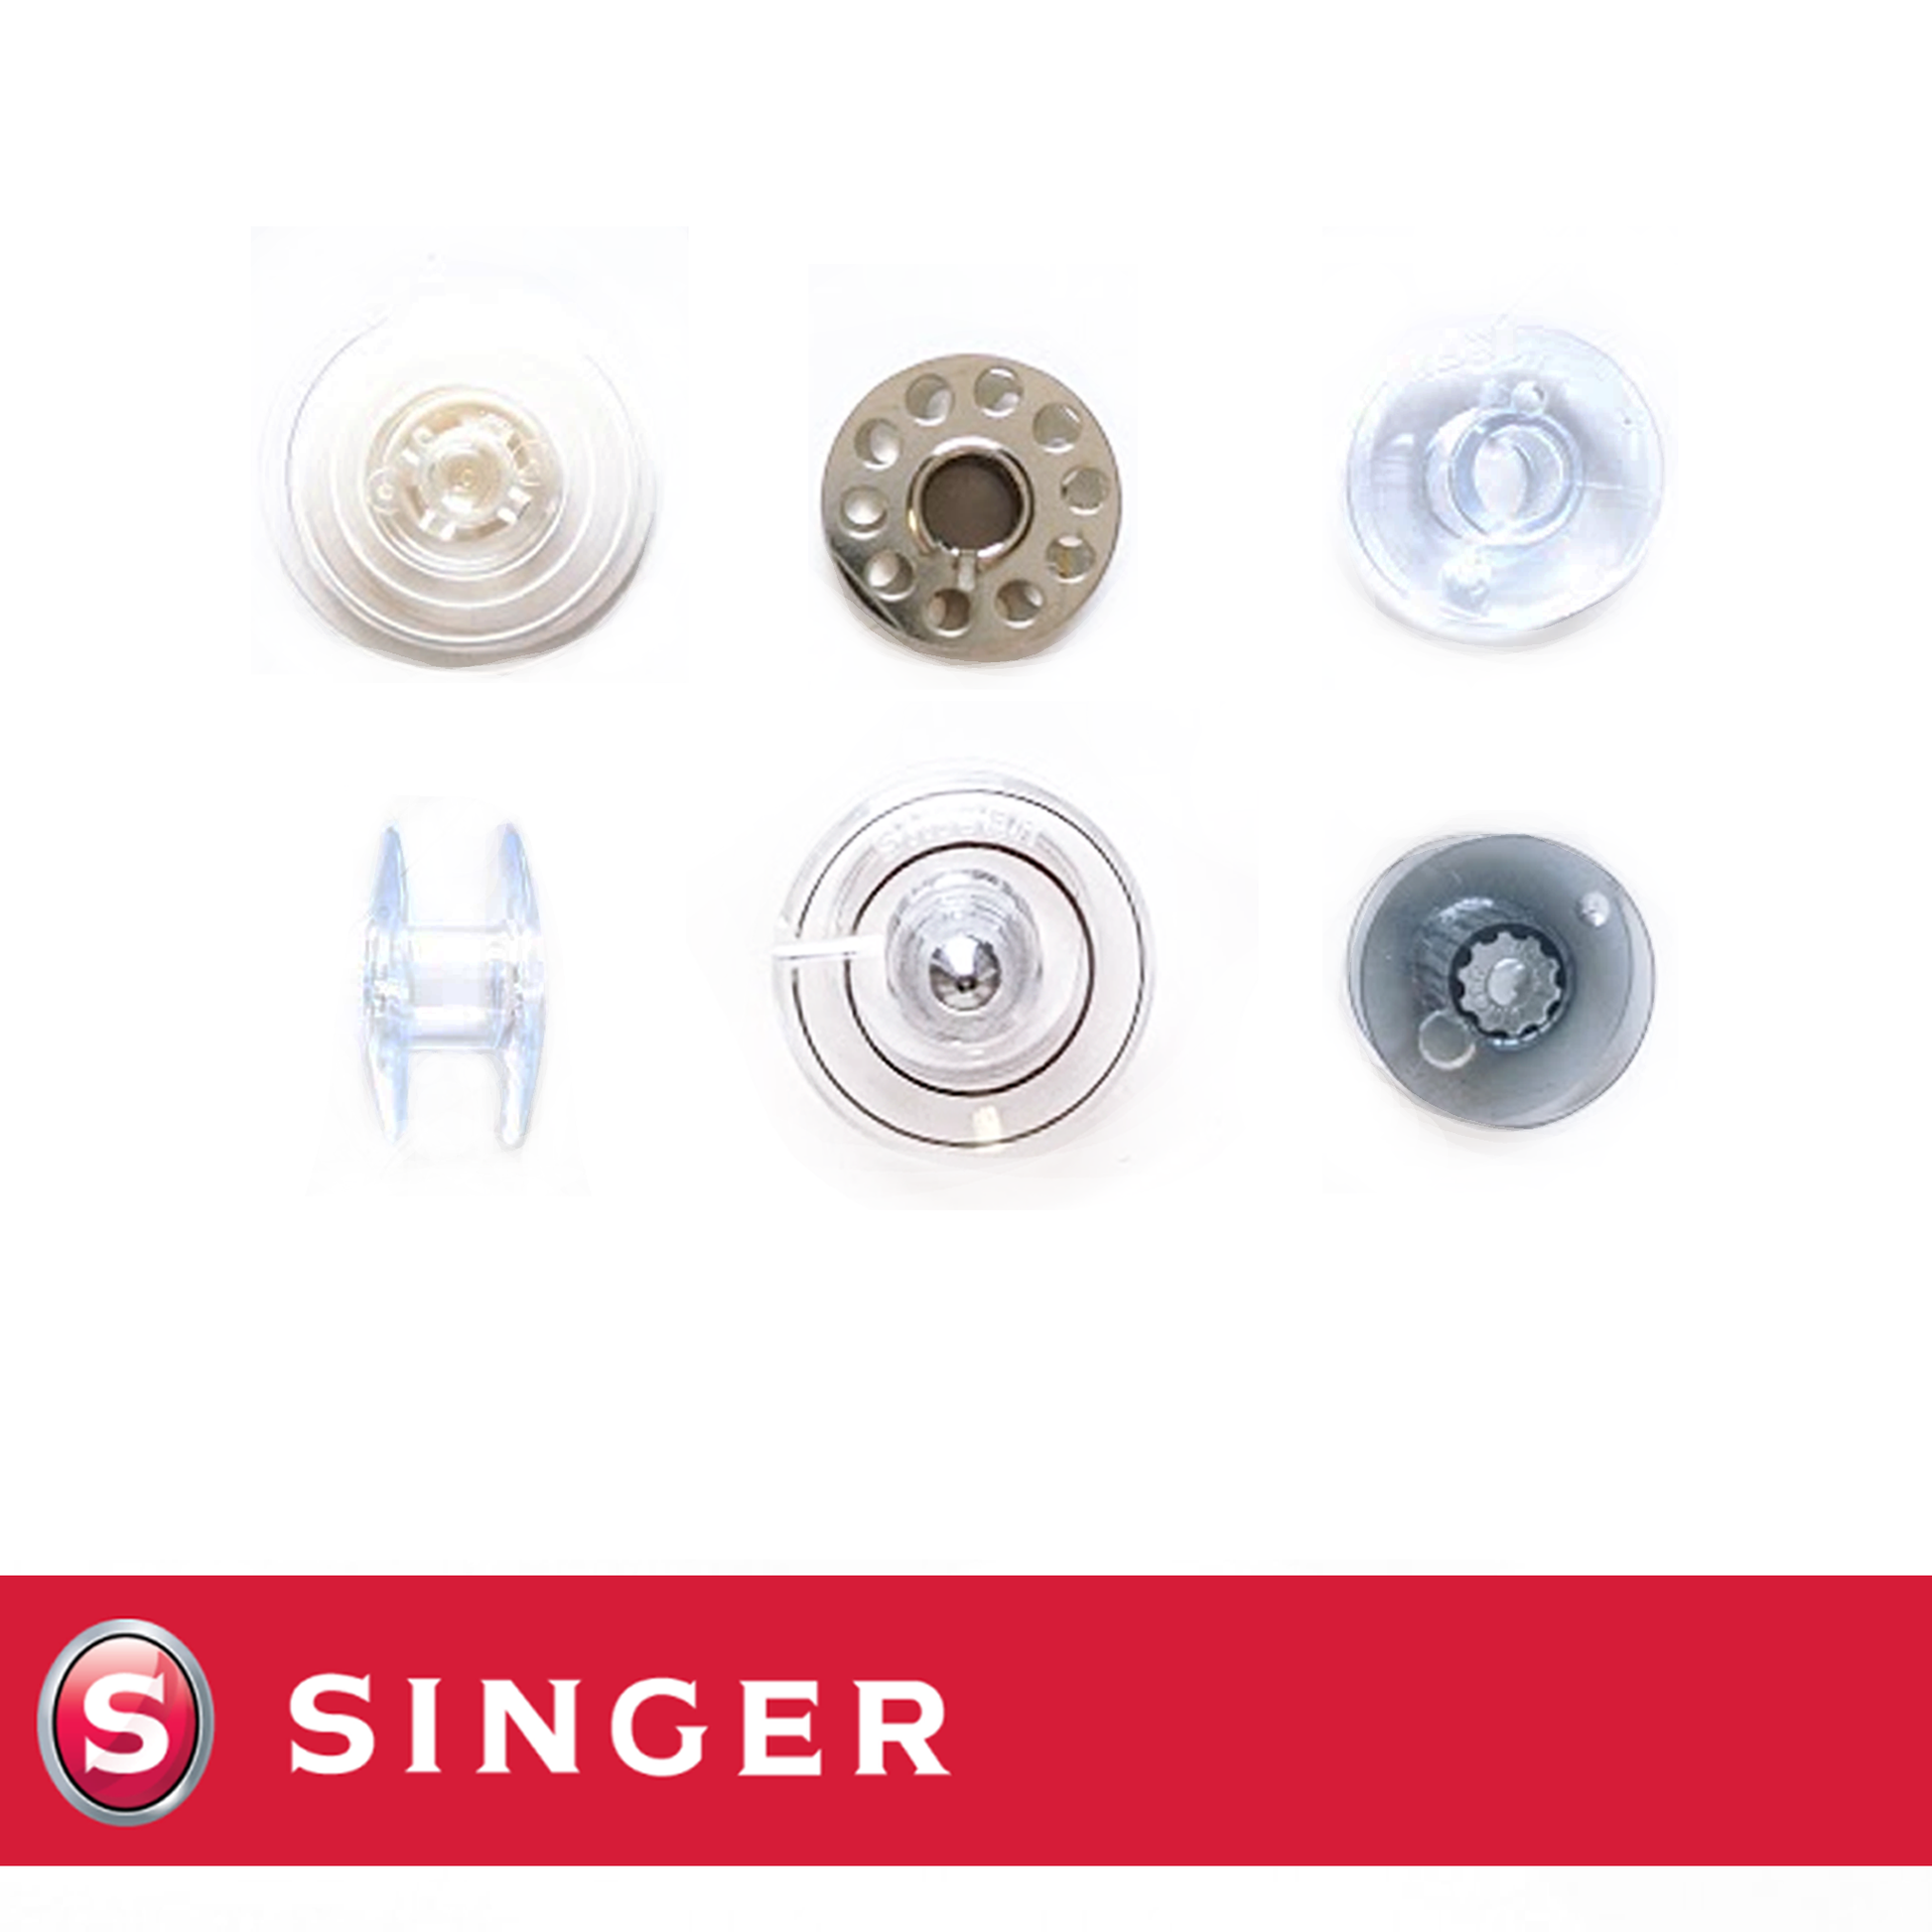 SINGER® Class 15 Black & White Threaded Bobbins with Case, 36ct.